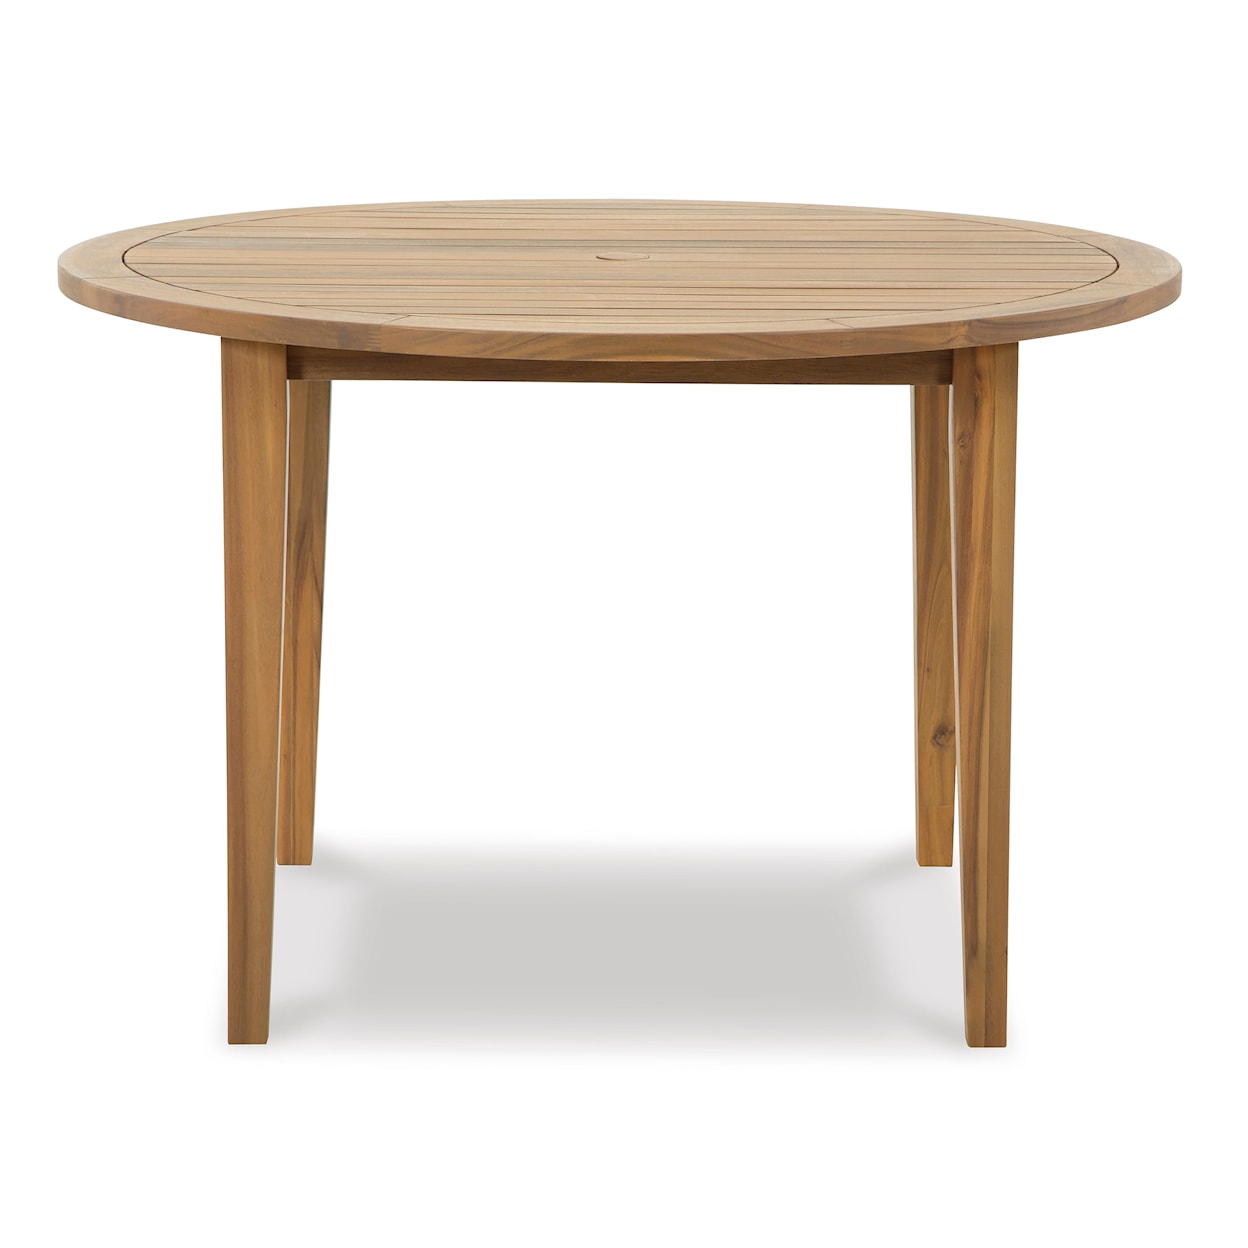 Benchcraft Janiyah Outdoor Dining Table